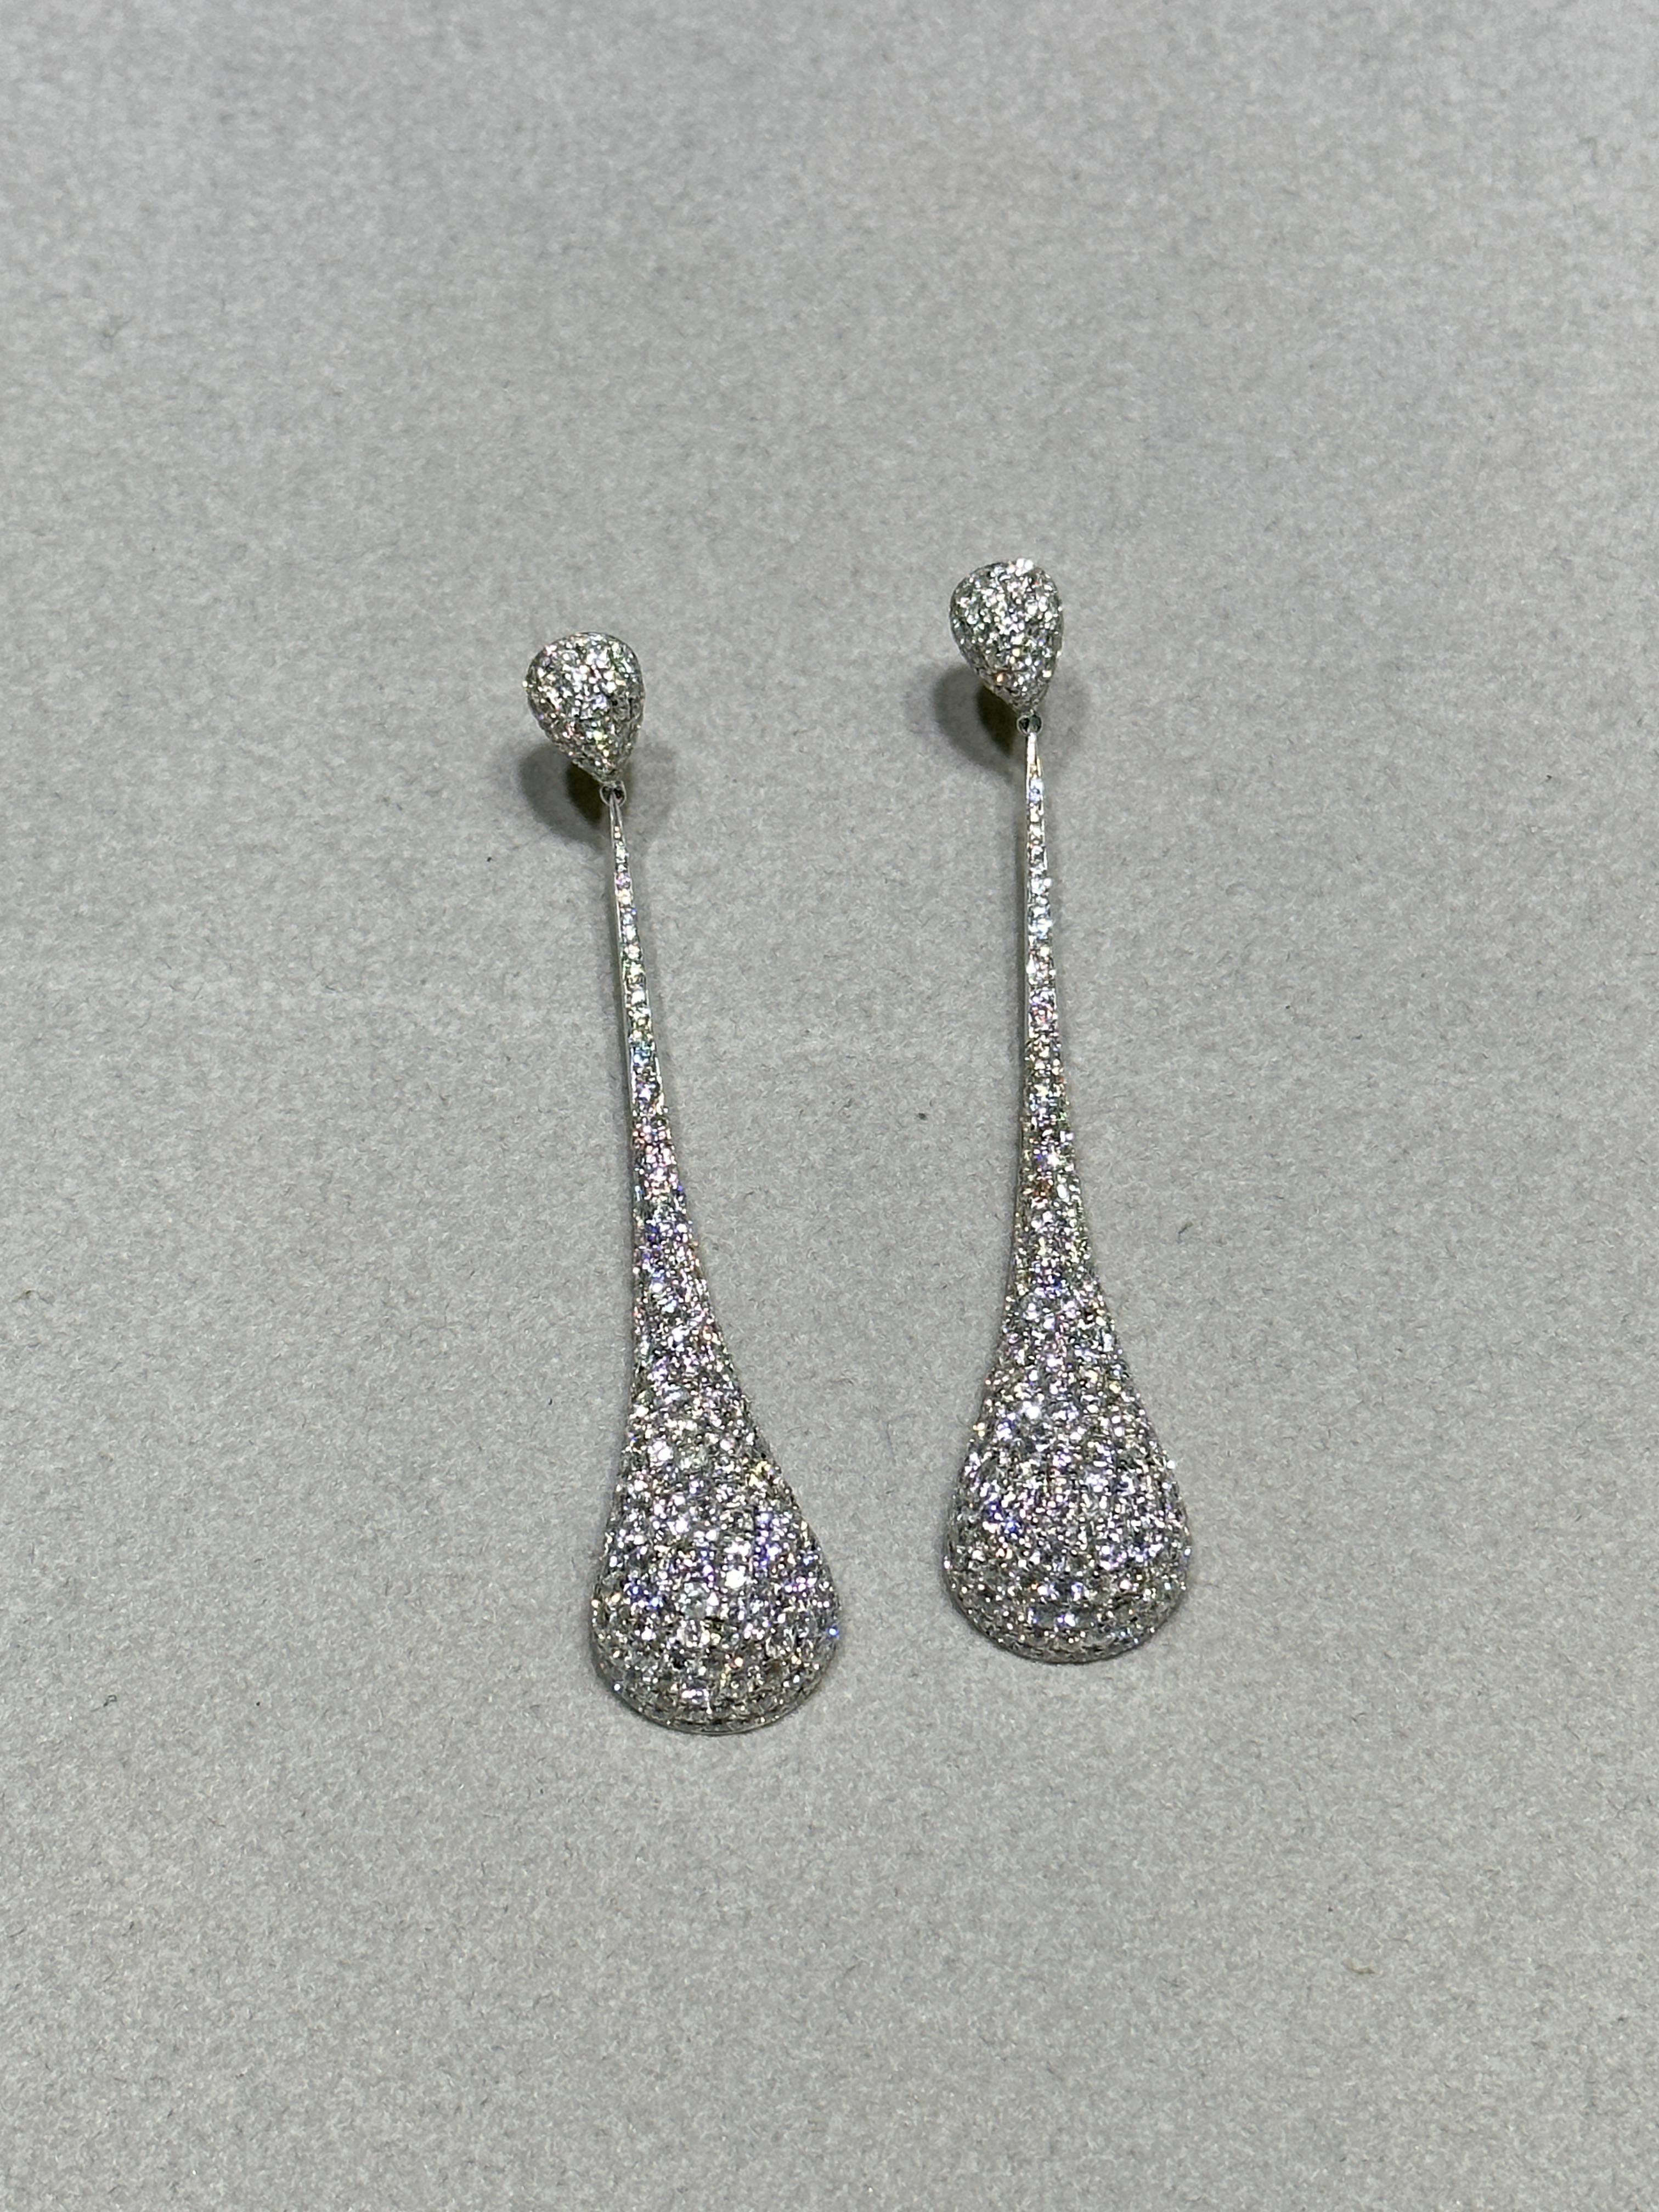 The Following Item we are offering is a Rare Important Radiant 18KT Gold Large Rare Fancy Diamond Dangle Drop Earrings. These Magnificent Rare Fancy Large Diamond Drop Earrings are comprised of Rare Glittering Fancy Round Diamonds.T.C.W. almost